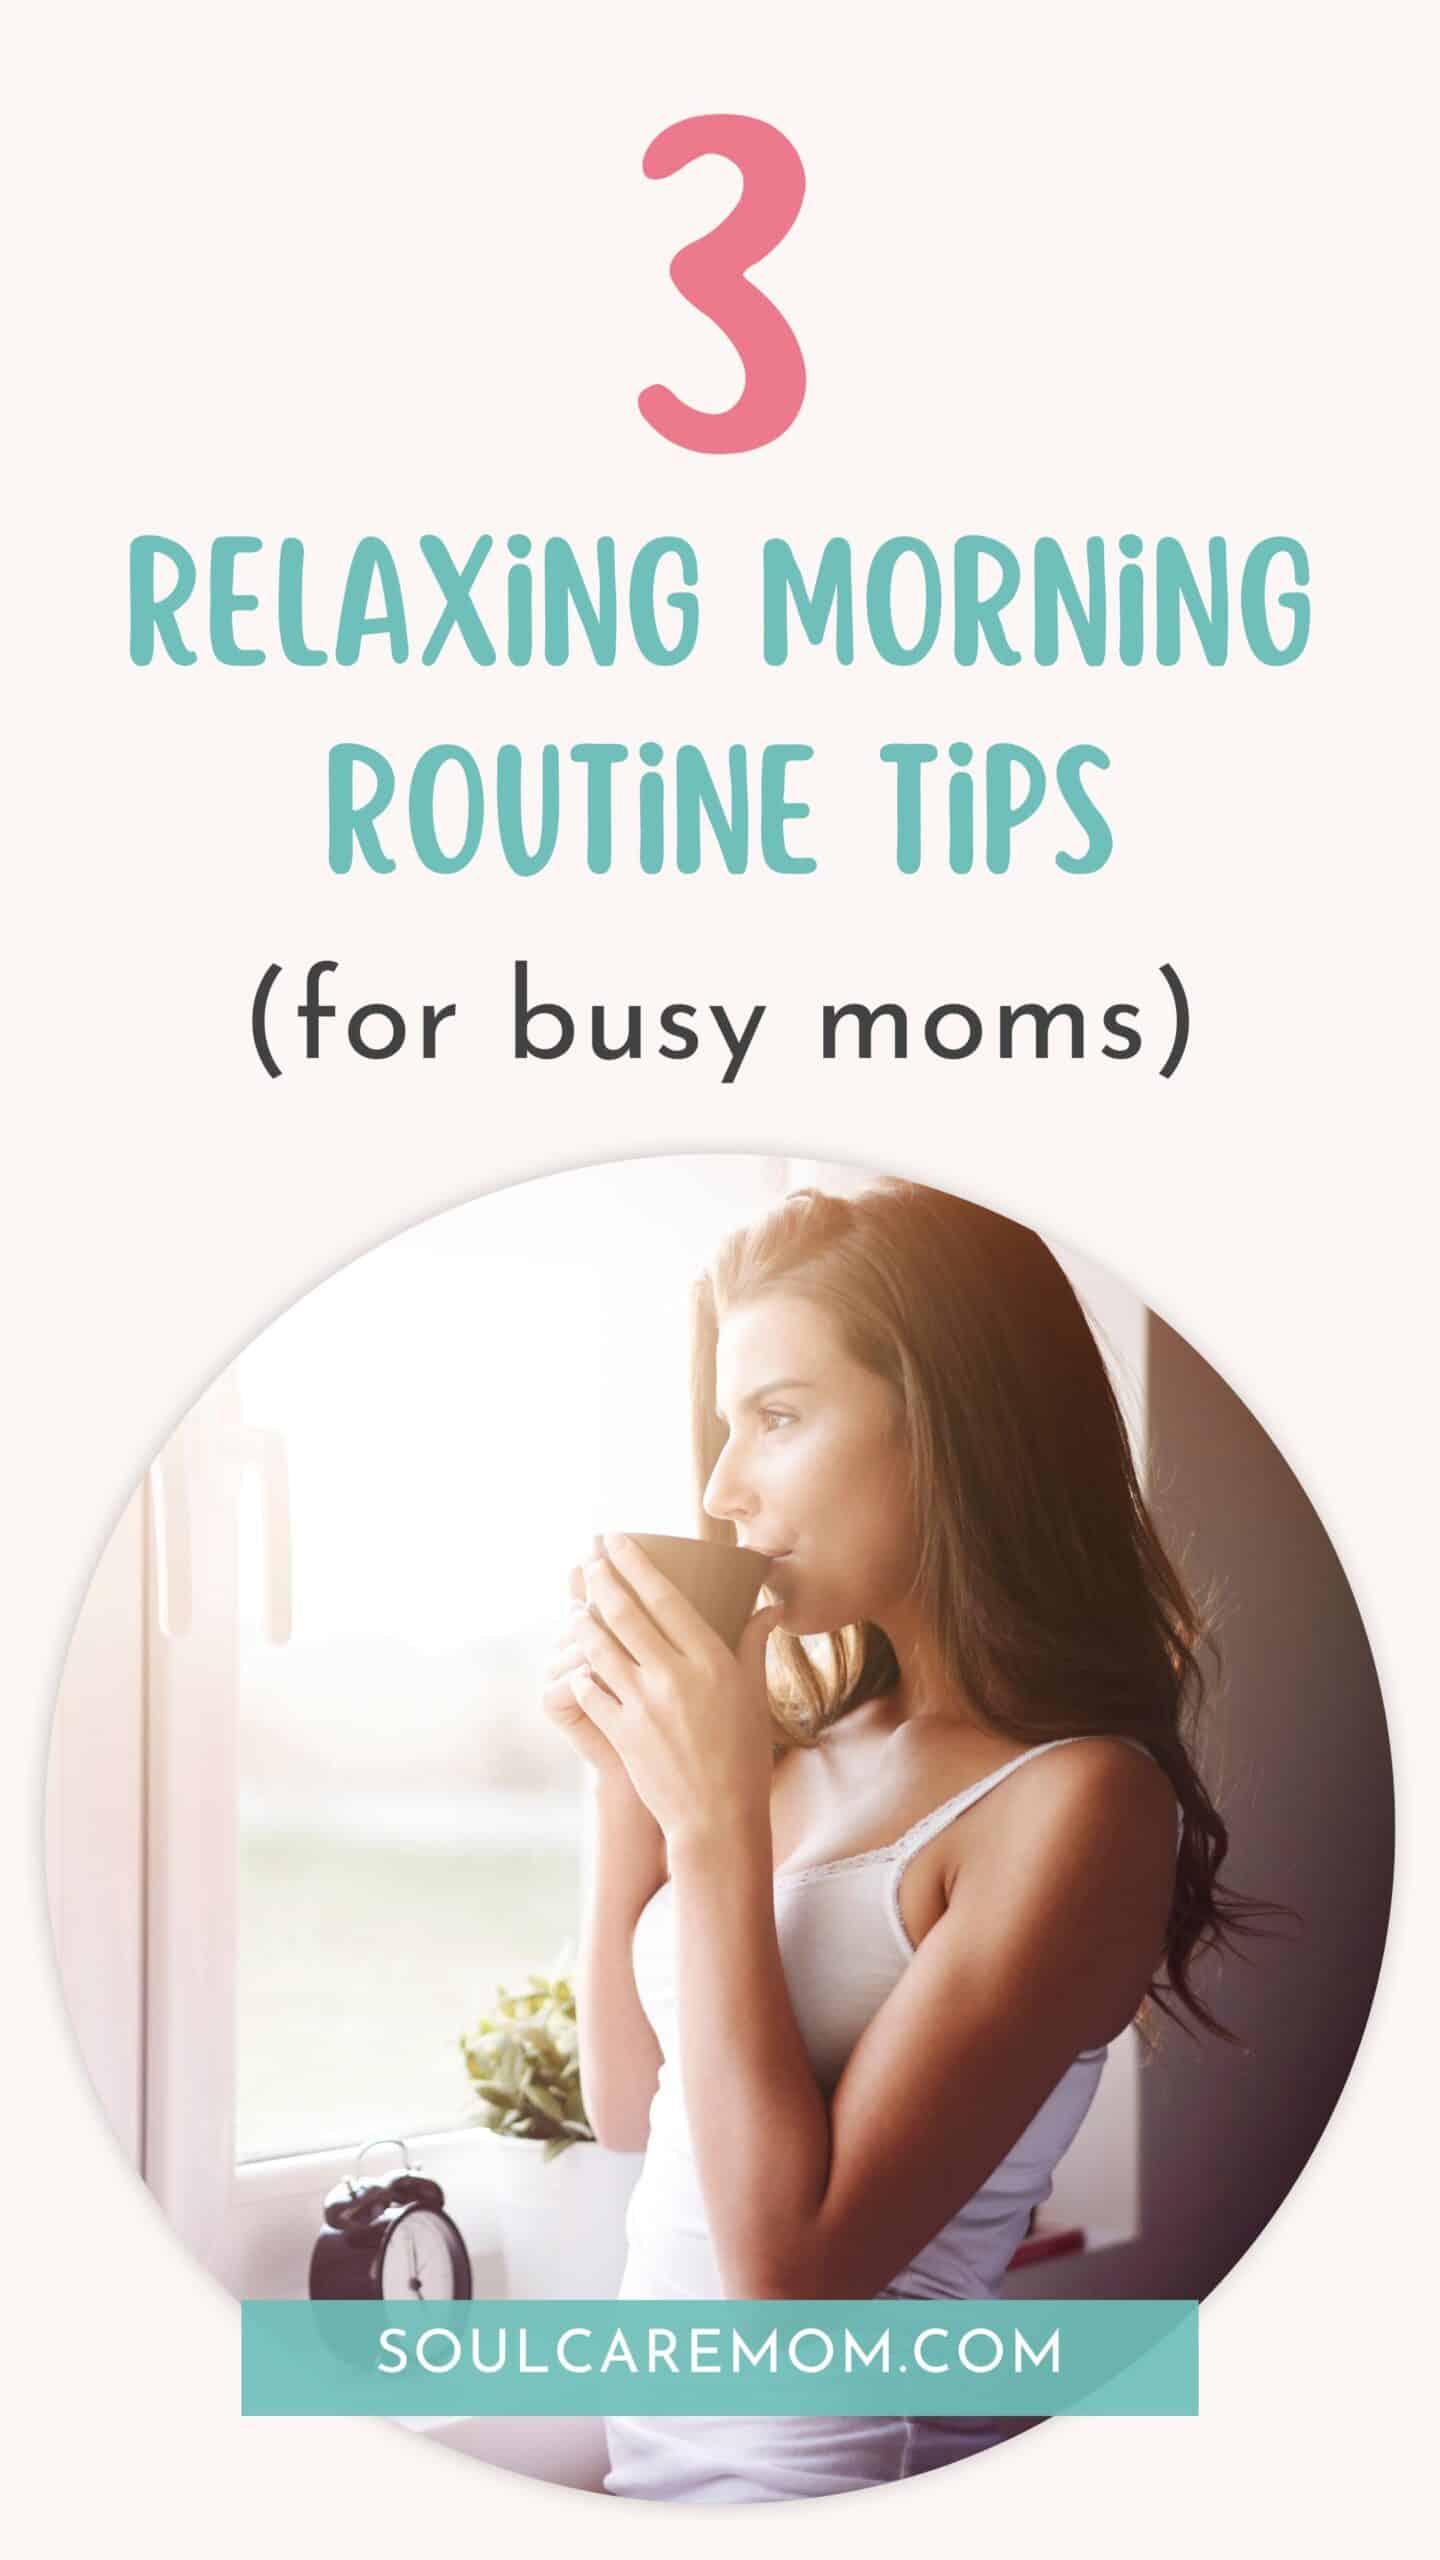 woman enjoying a cup of coffee as she moves through self care morning routine tips for a relaxing morning